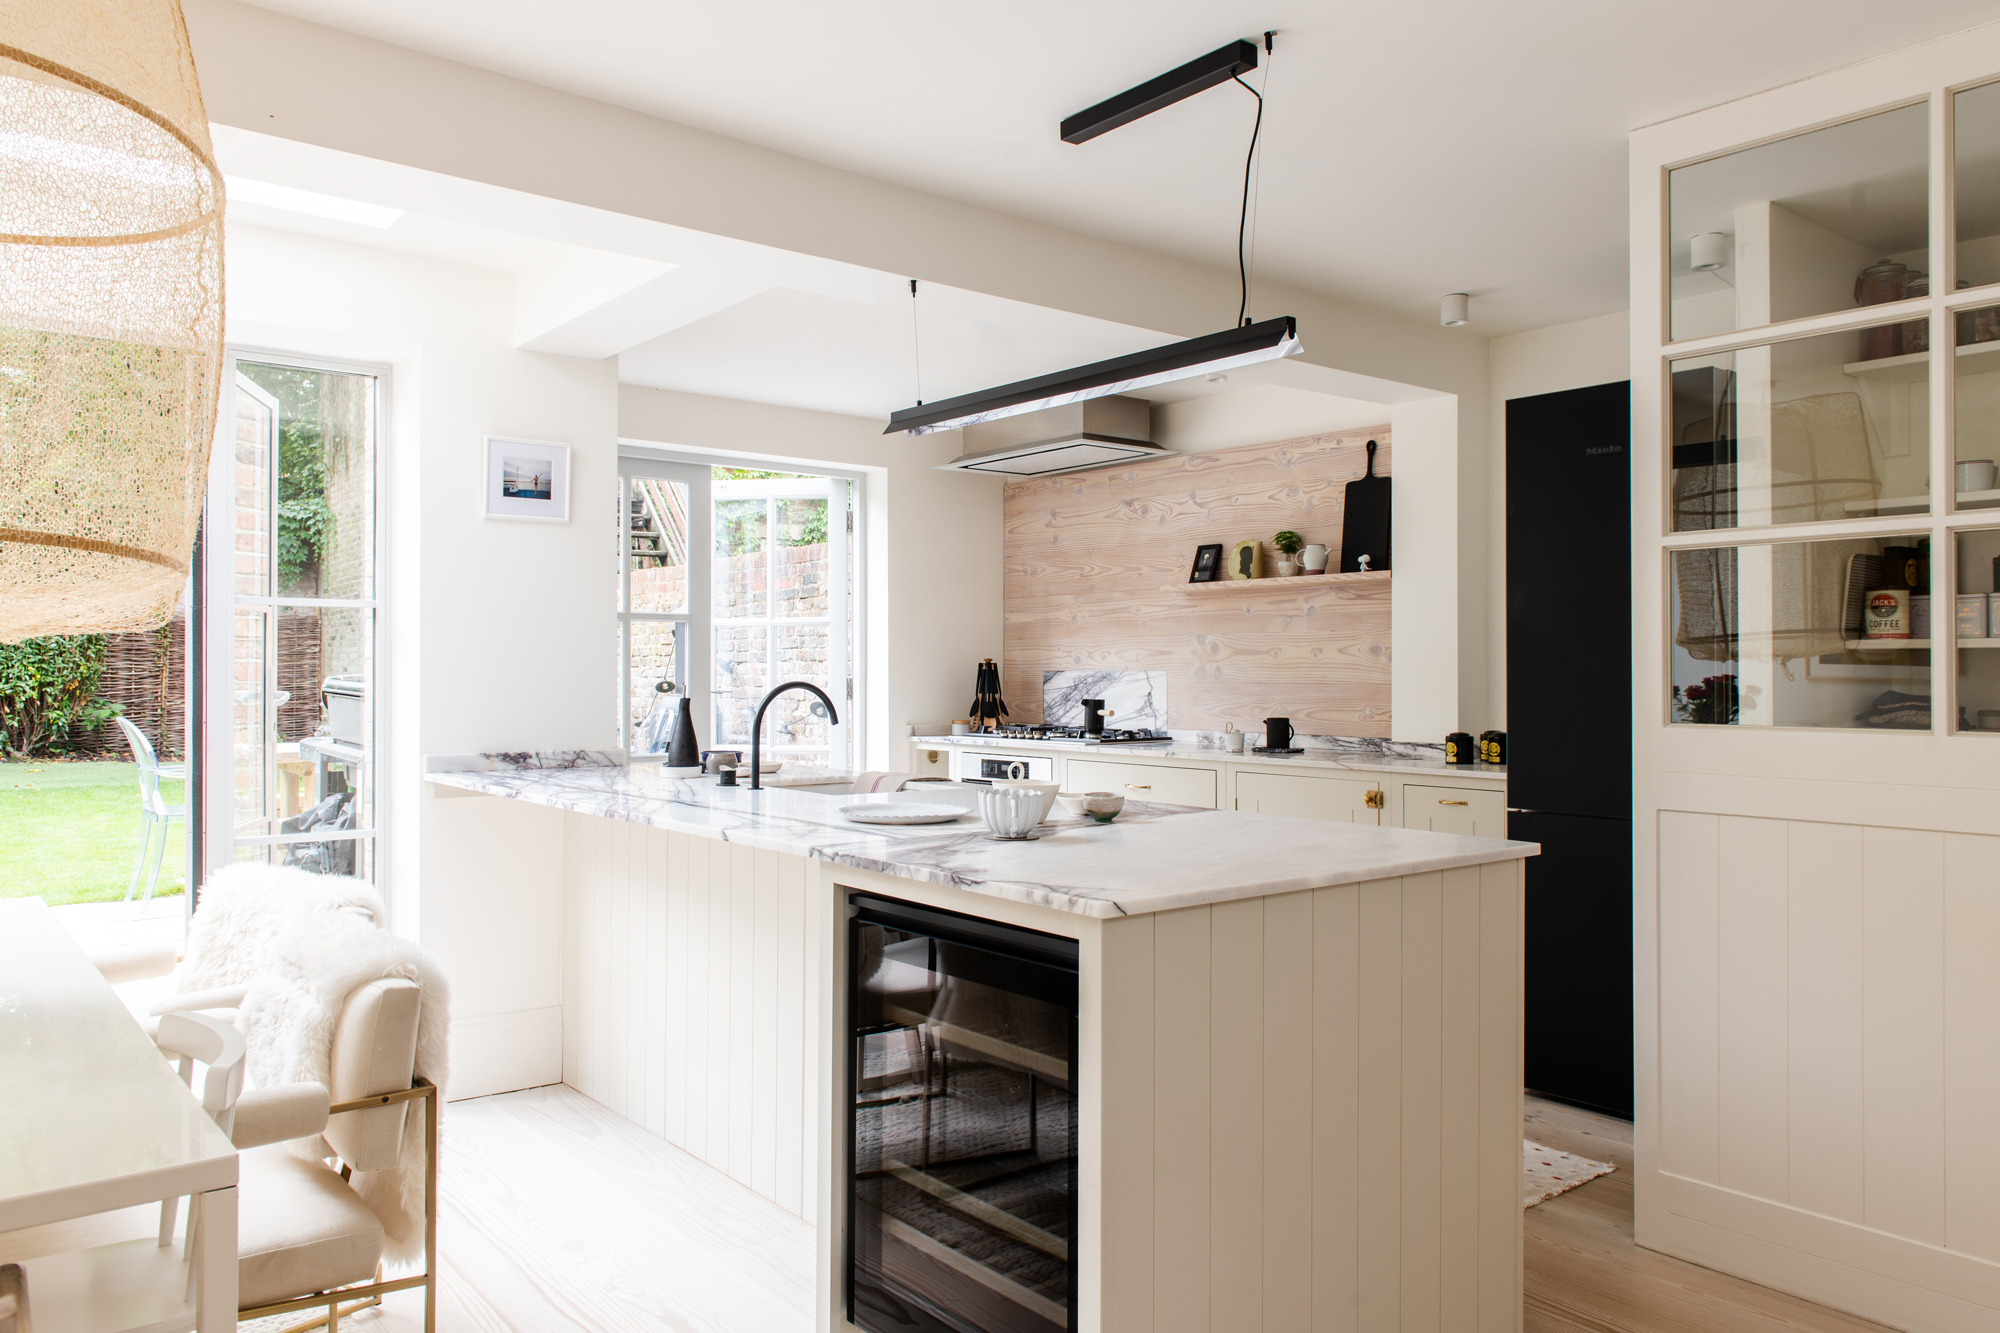 How Much Does A New Kitchen Cost, How Much Does A Small Kitchen Renovation Cost Uk